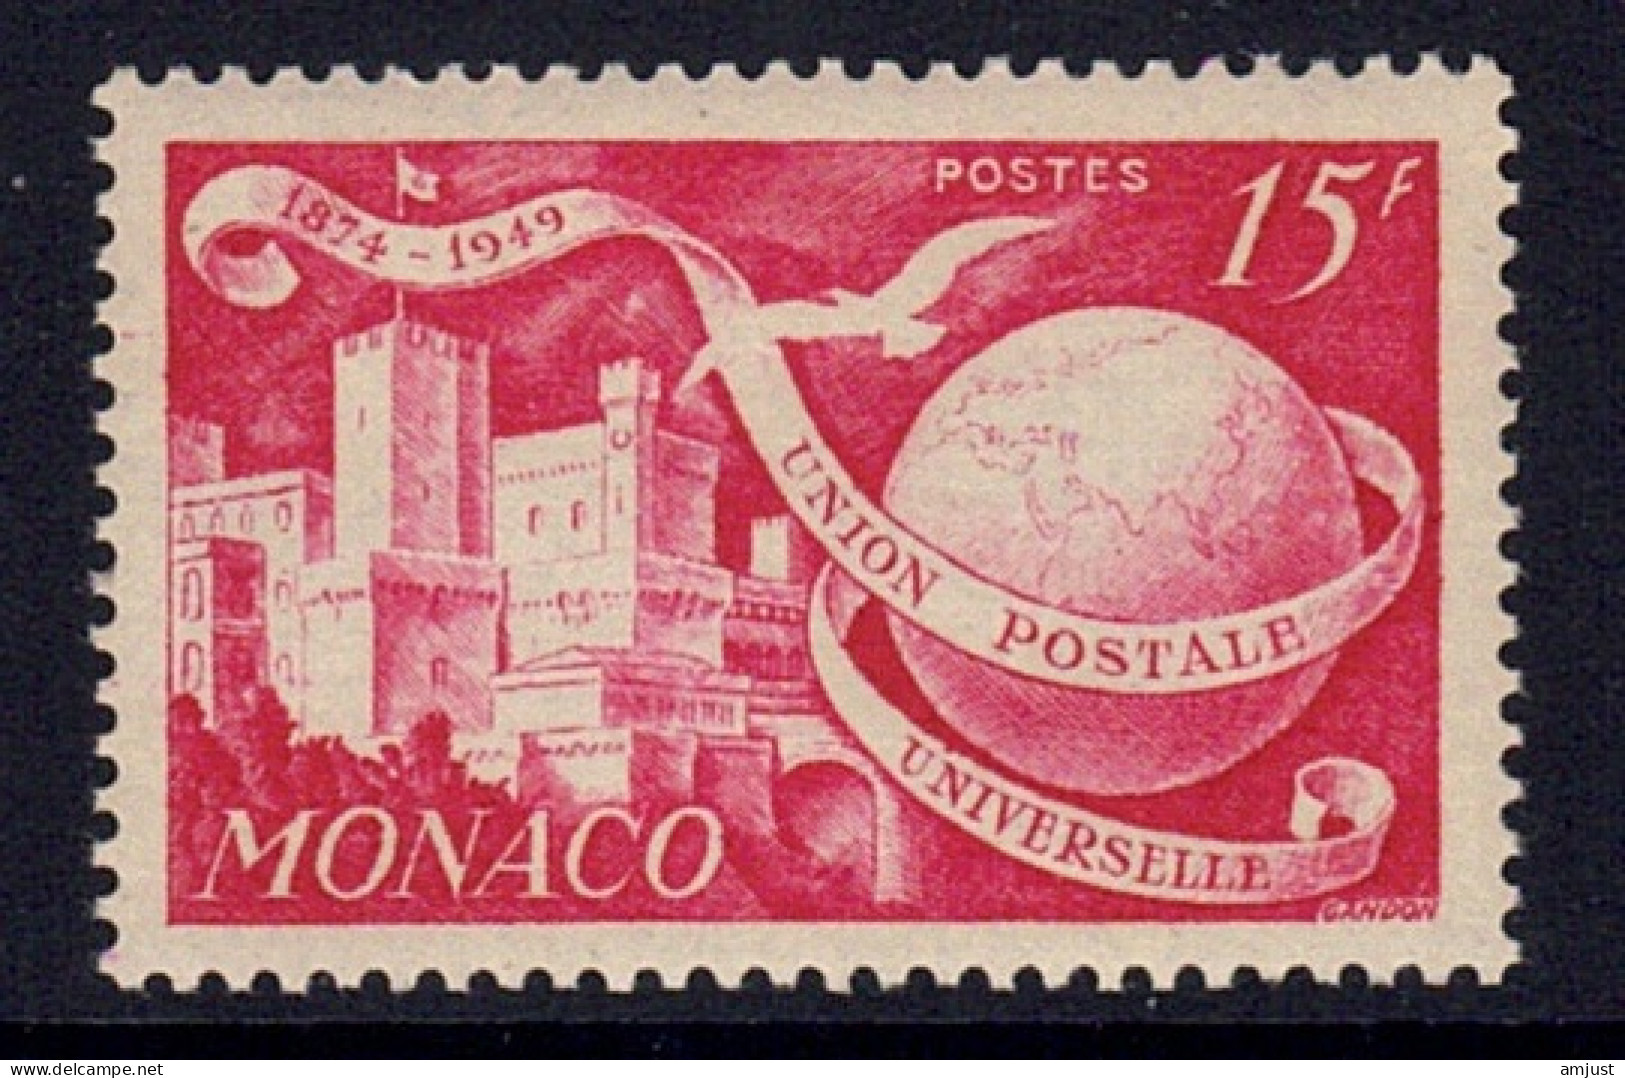 Monaco // 1949  // 75 Ans De L'U.P.U. Timbre Neuf** MNH  No. Y&T 333 - Unused Stamps